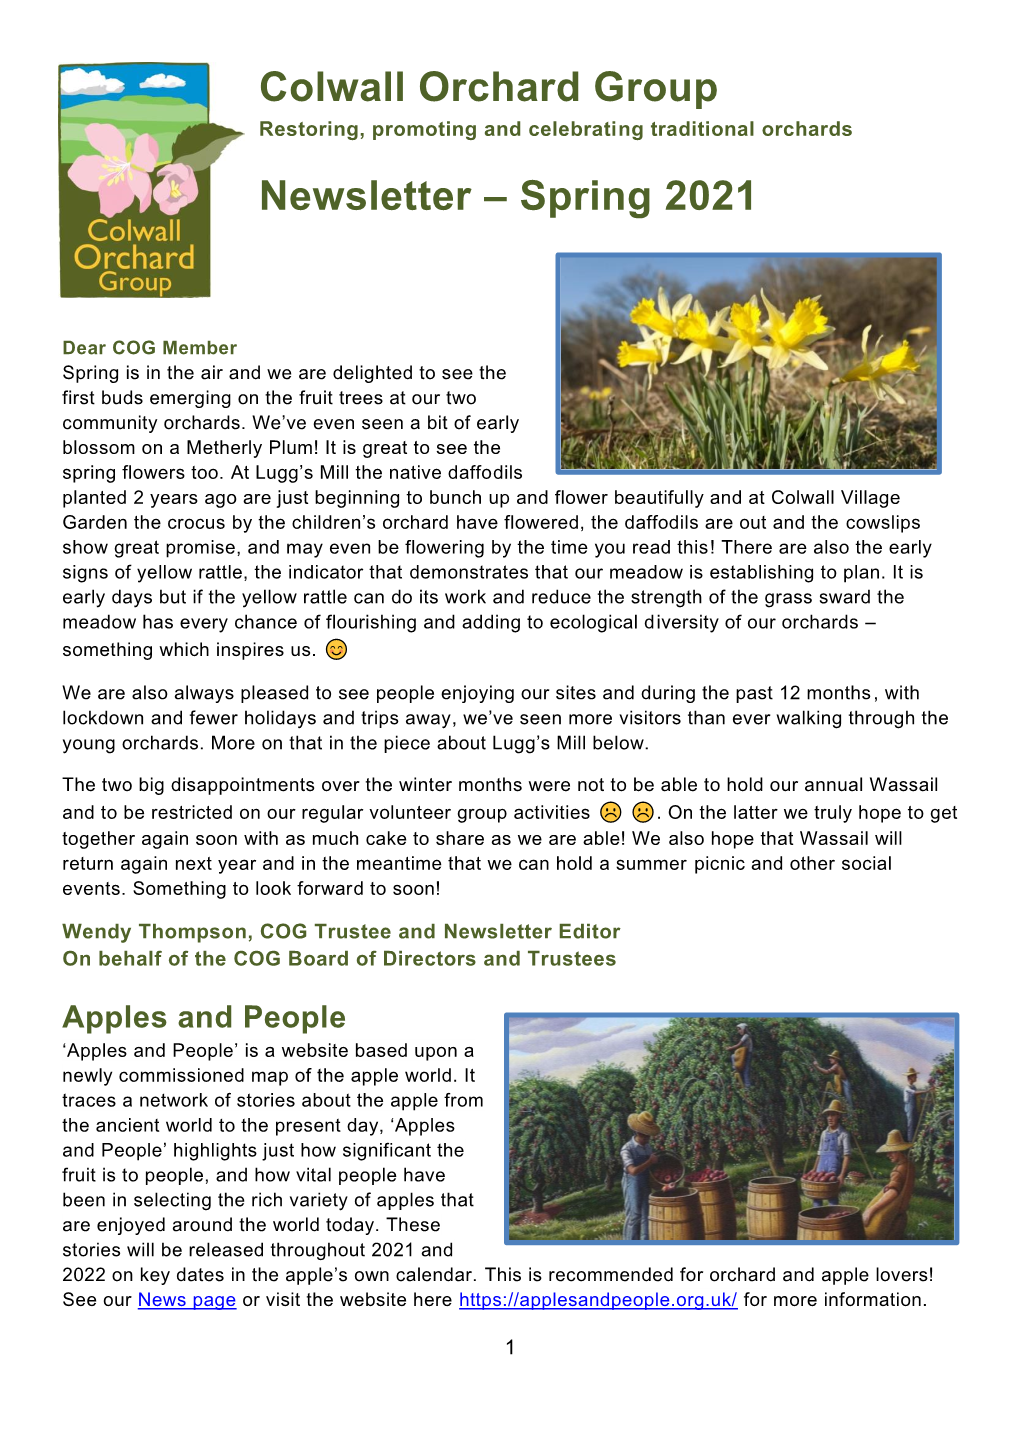 Colwall Orchard Group Newsletter – Spring 2021